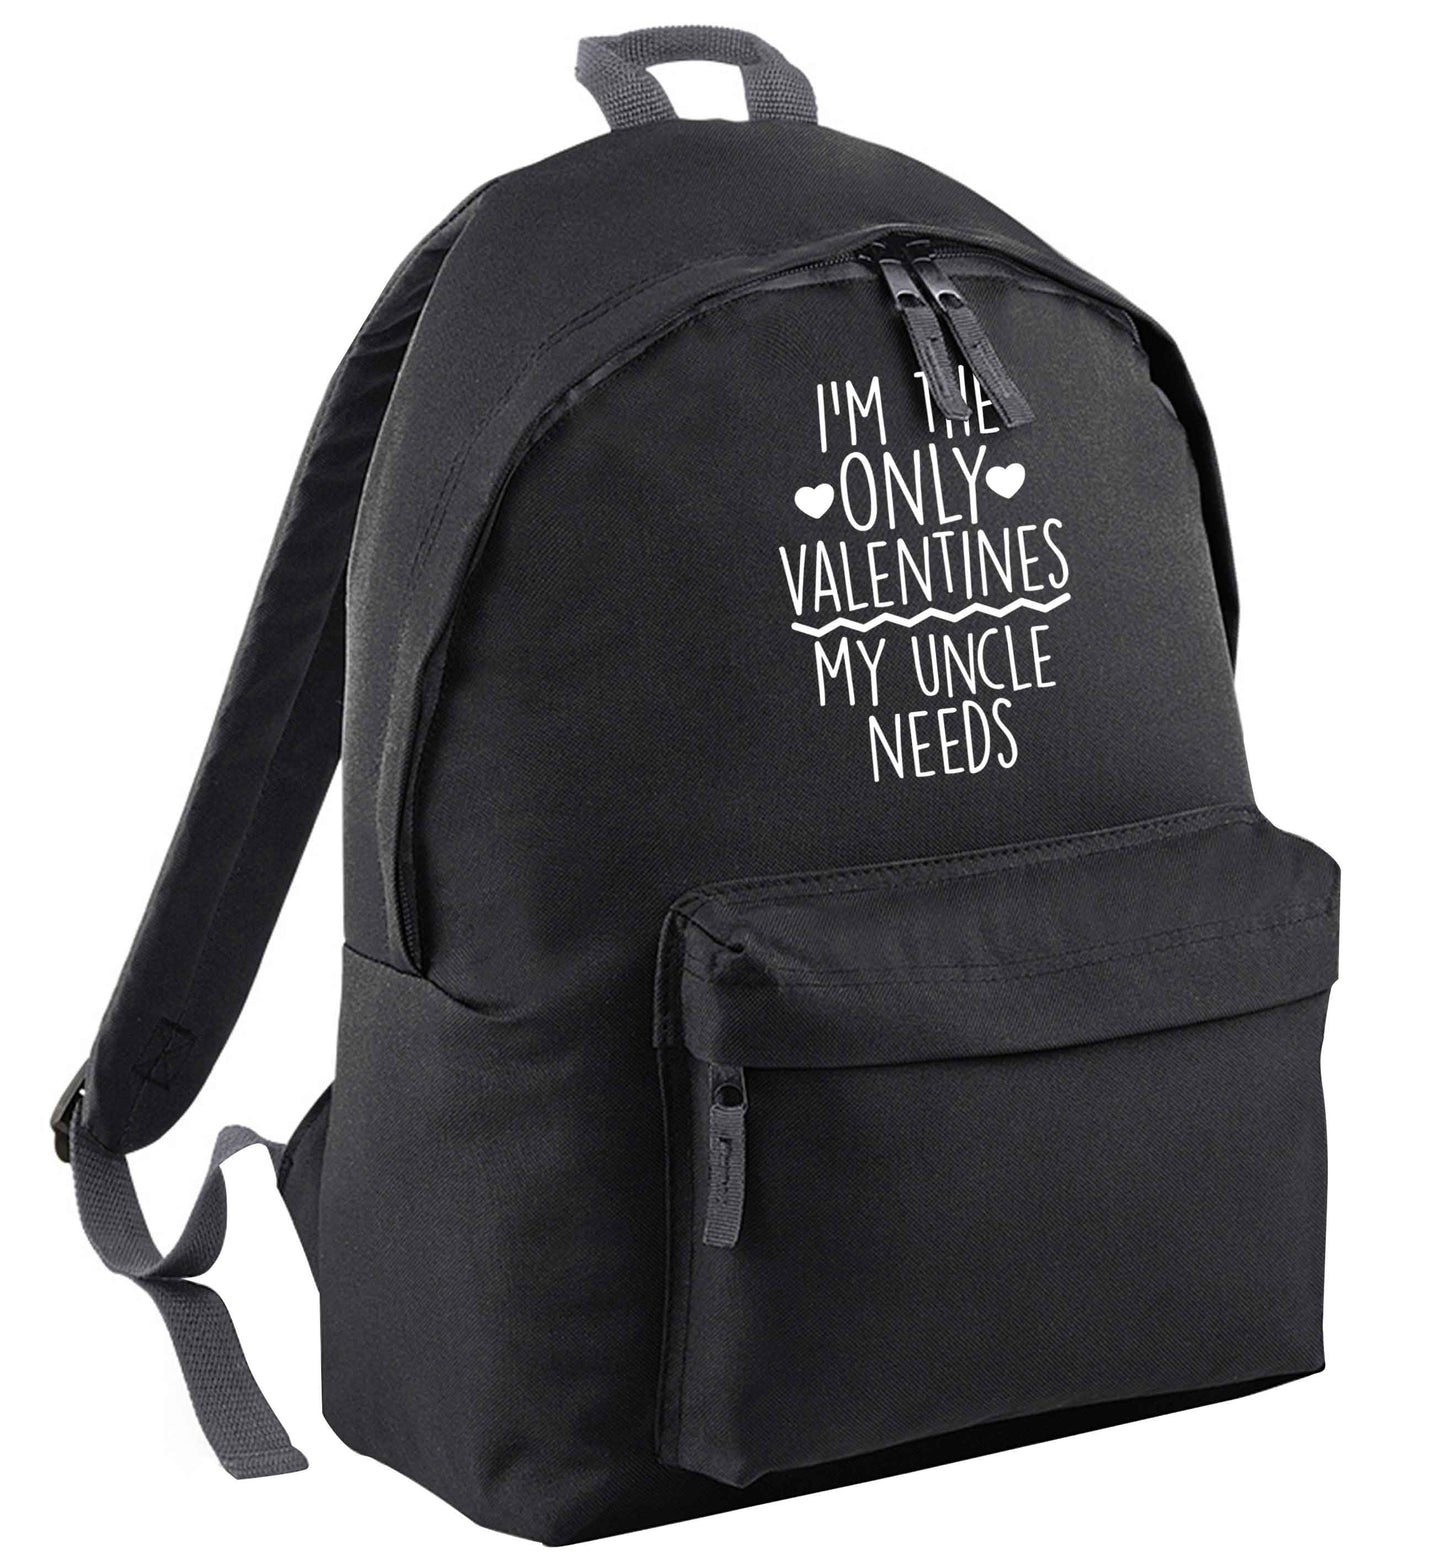 I'm the only valentines my uncle needs | Adults backpack